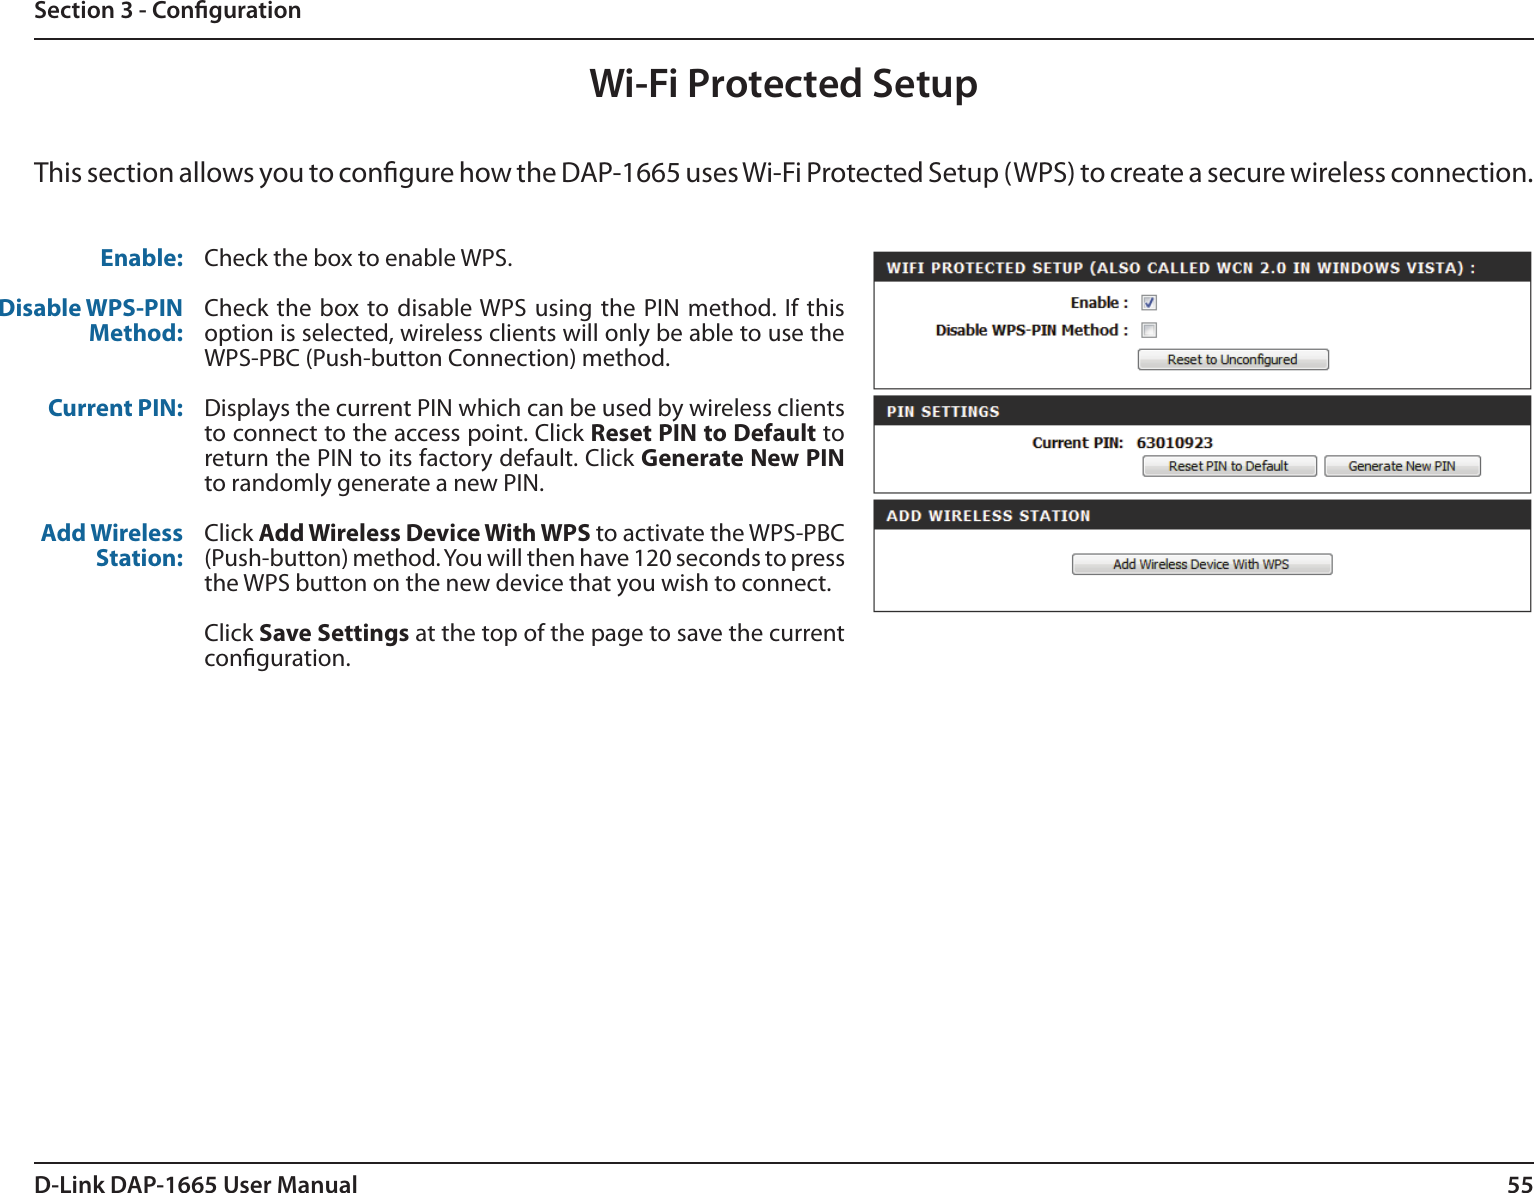 55D-Link DAP-1665 User ManualSection 3 - CongurationWi-Fi Protected SetupThis section allows you to congure how the DAP-1665 uses Wi-Fi Protected Setup (WPS) to create a secure wireless connection. Enable:Disable WPS-PIN Method:Current PIN:Add Wireless Station:Check the box to enable WPS.Check the box to disable WPS  using the PIN method. If this option is selected, wireless clients will only be able to use the WPS-PBC (Push-button Connection) method.Displays the current PIN which can be used by wireless clients to connect to the access point. Click Reset PIN to Default to return the PIN to its factory default. Click Generate New PIN to randomly generate a new PIN.Click Add Wireless Device With WPS to activate the WPS-PBC (Push-button) method. You will then have 120 seconds to press the WPS button on the new device that you wish to connect. Click Save Settings at the top of the page to save the current conguration. 